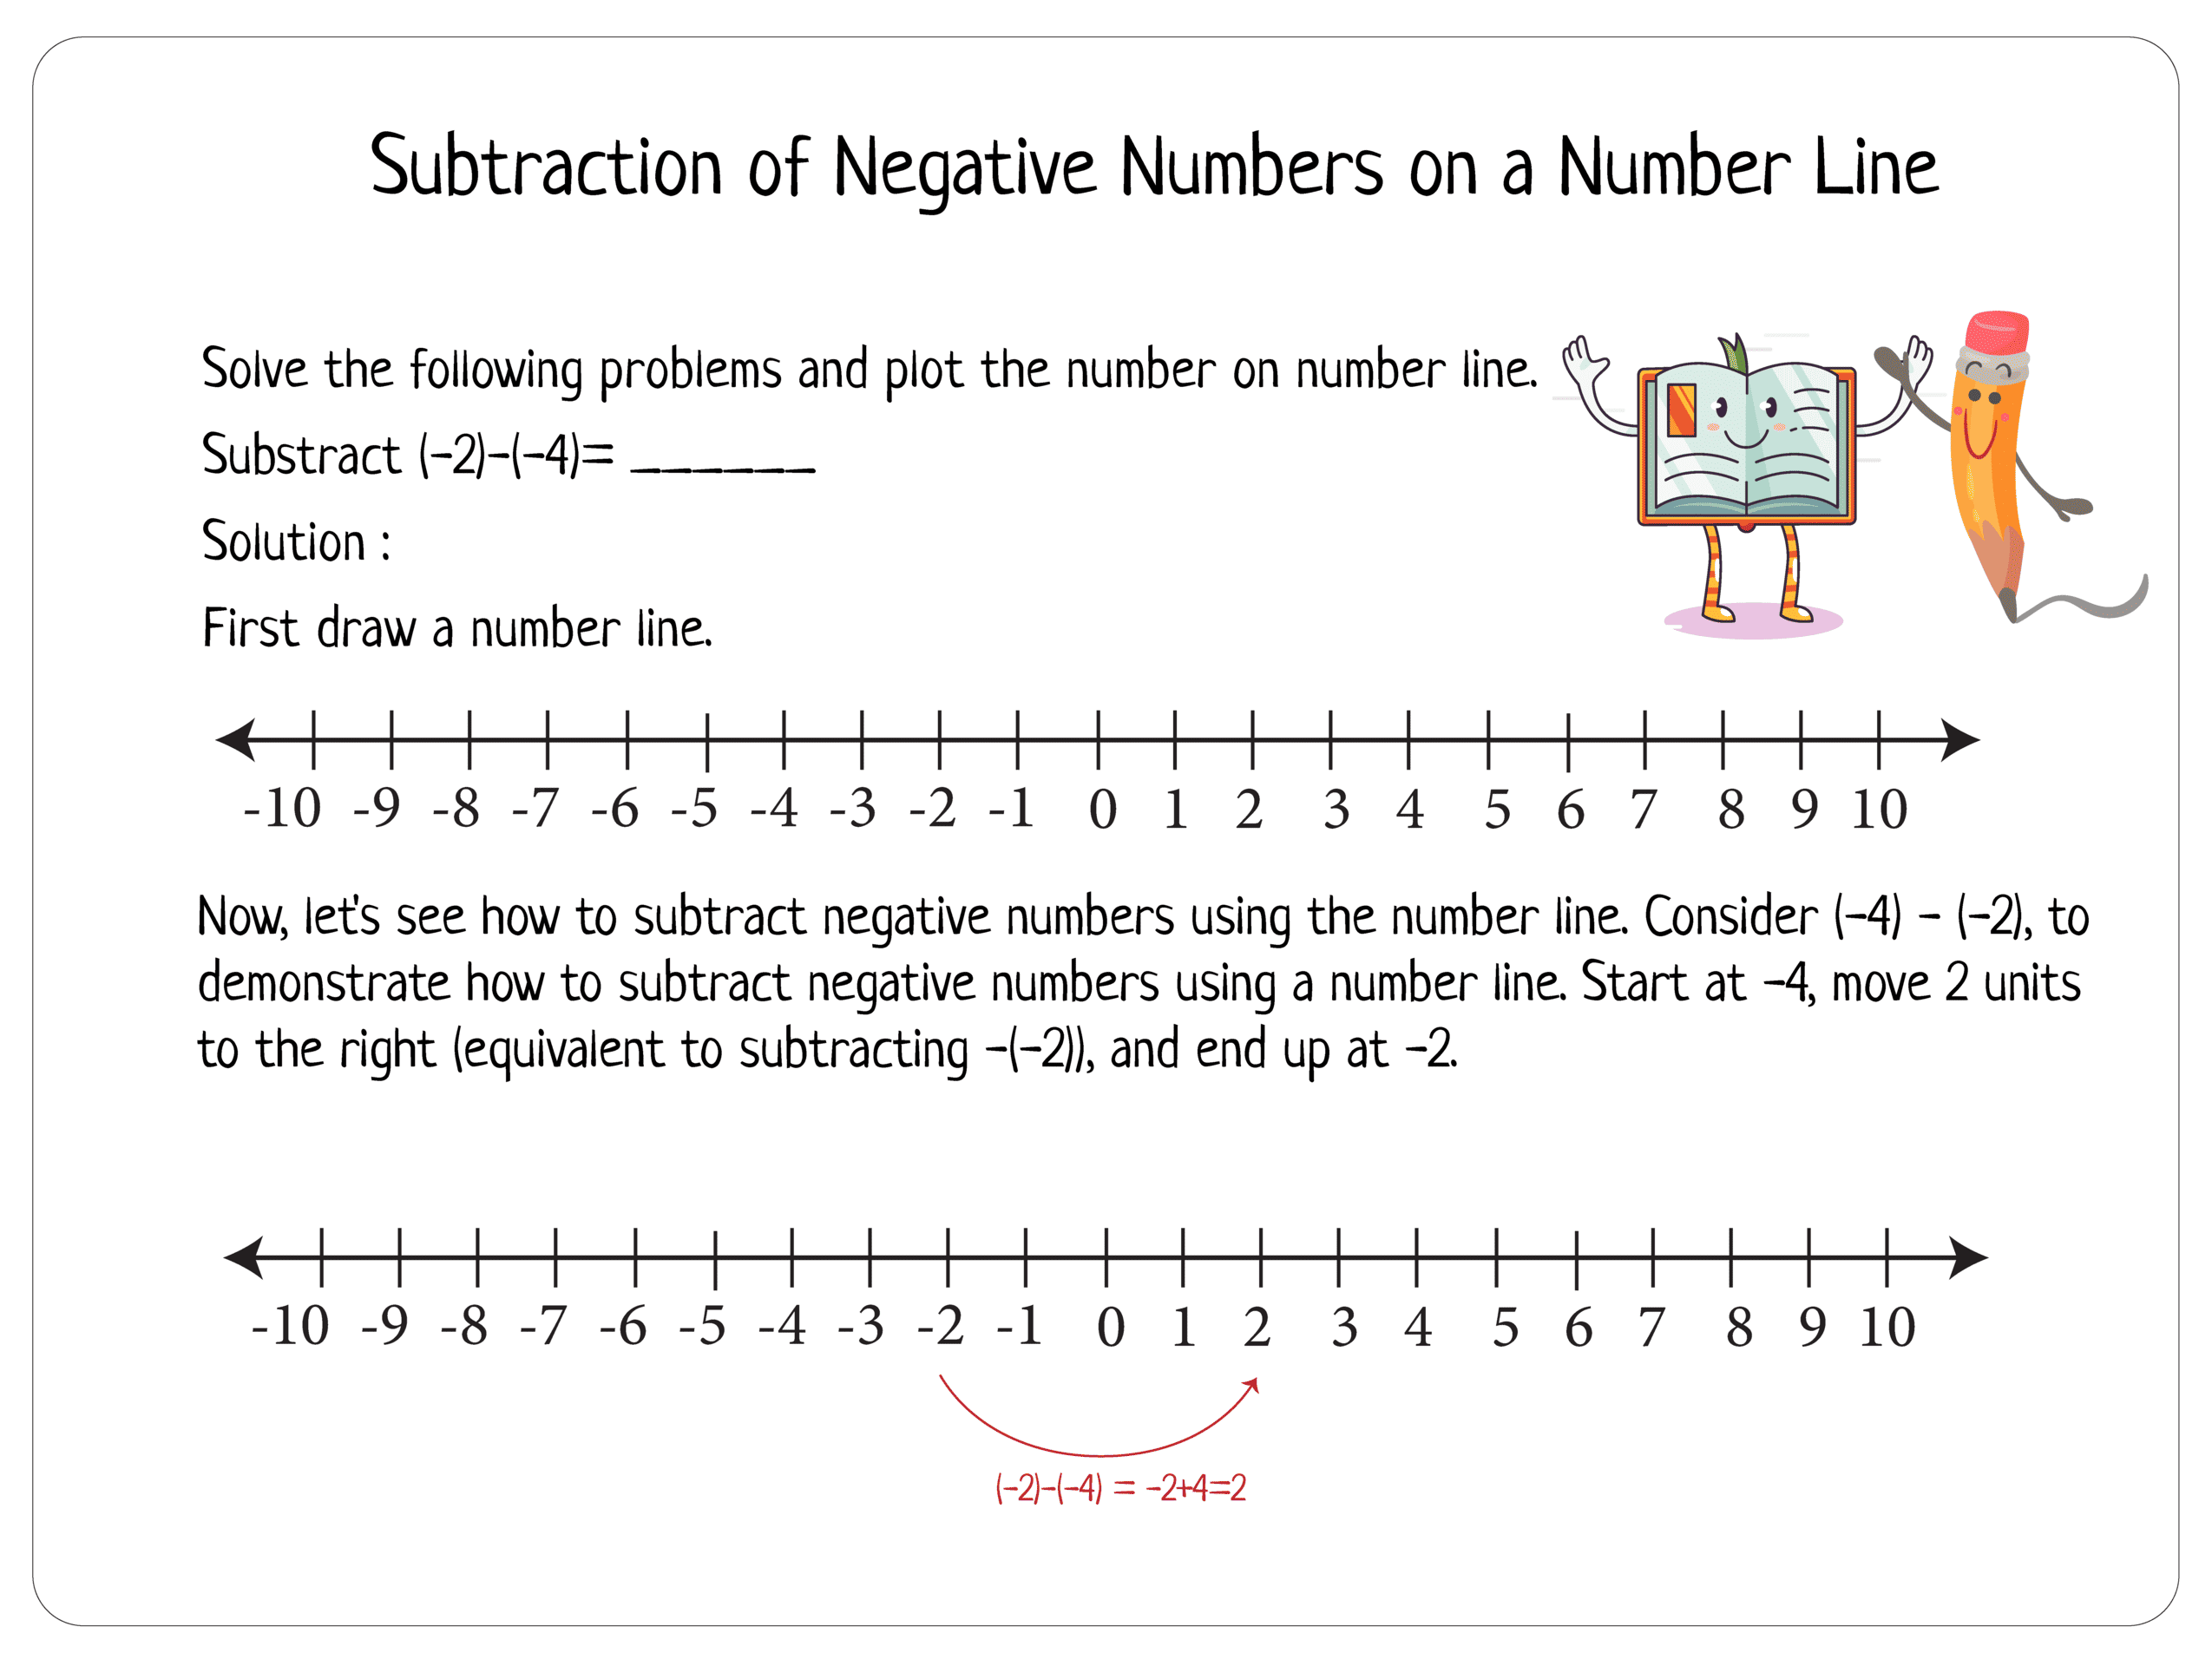 Steps of plotting negative numbers on a number line (5)